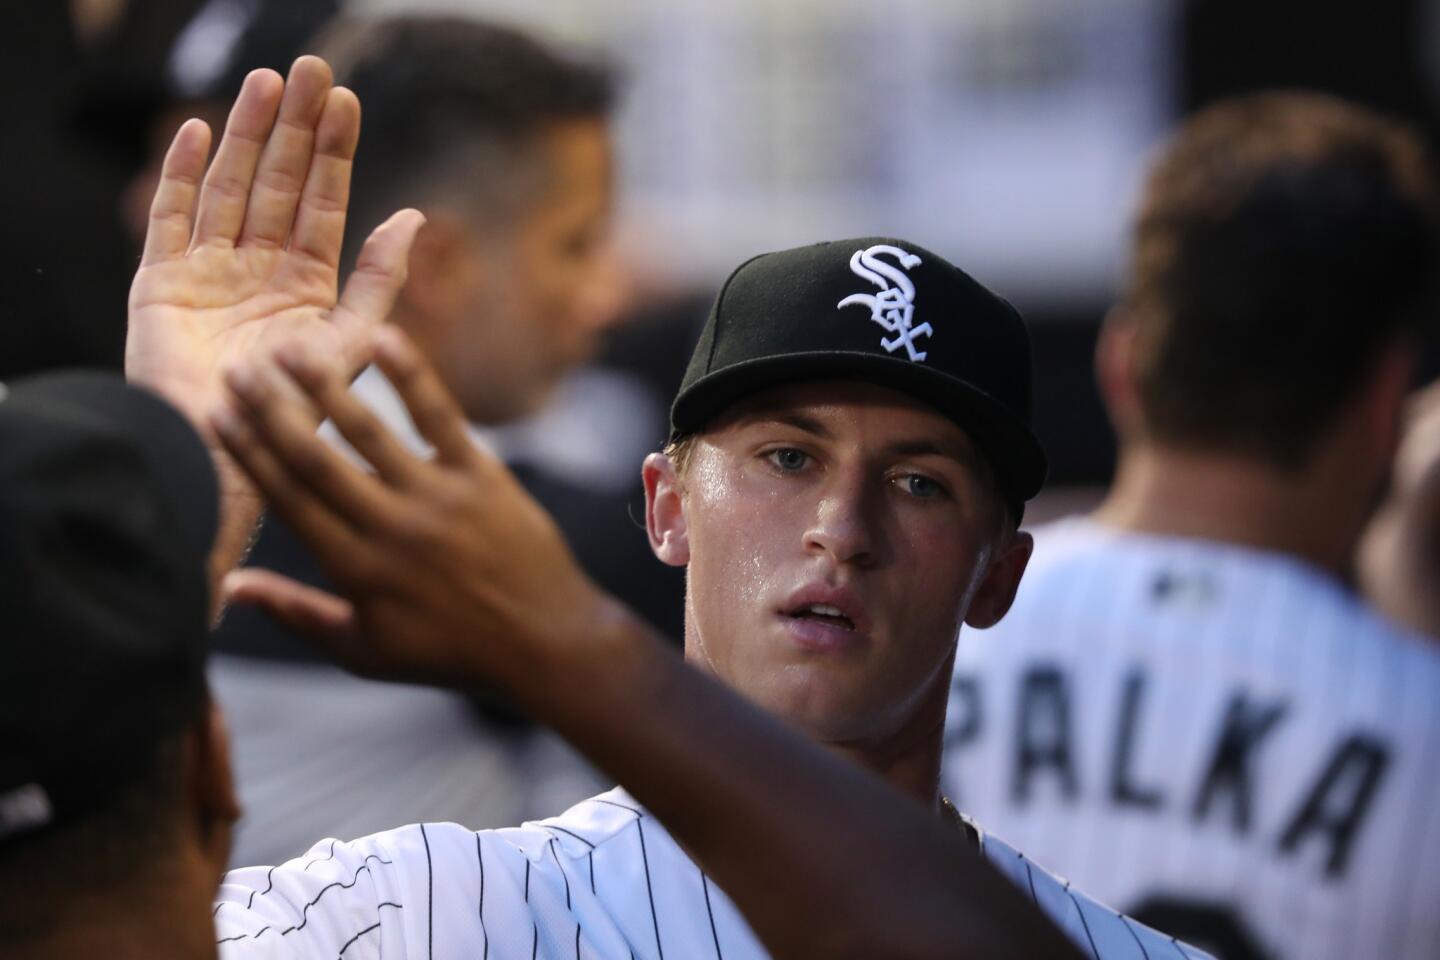 White Sox starting pitcher Michael Kopech gets a high-five in the dugout after throwing against the Red Sox in the first inning at Guaranteed Rate Field on Aug. 31, 2018.